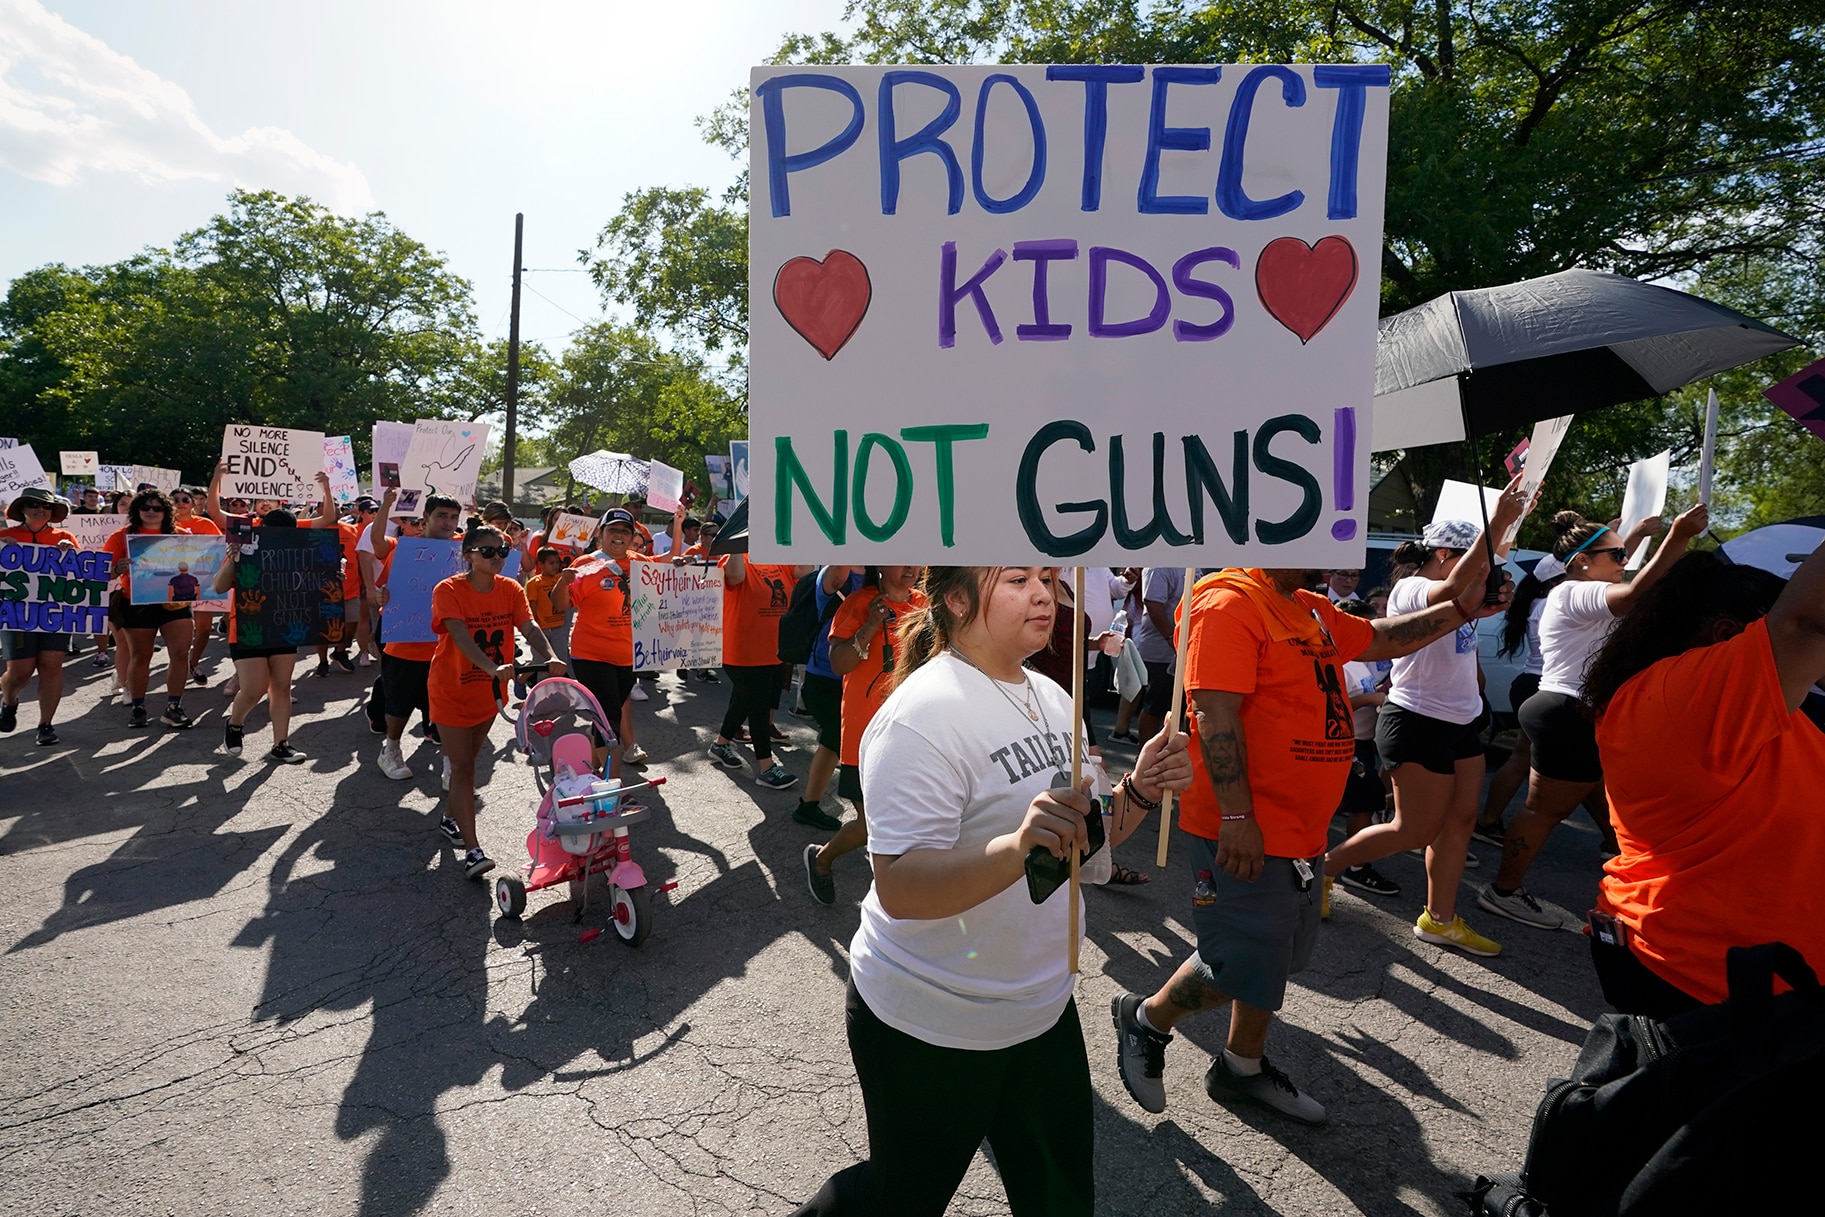 Robb Elementary victims and family members take part in a protest march and rally